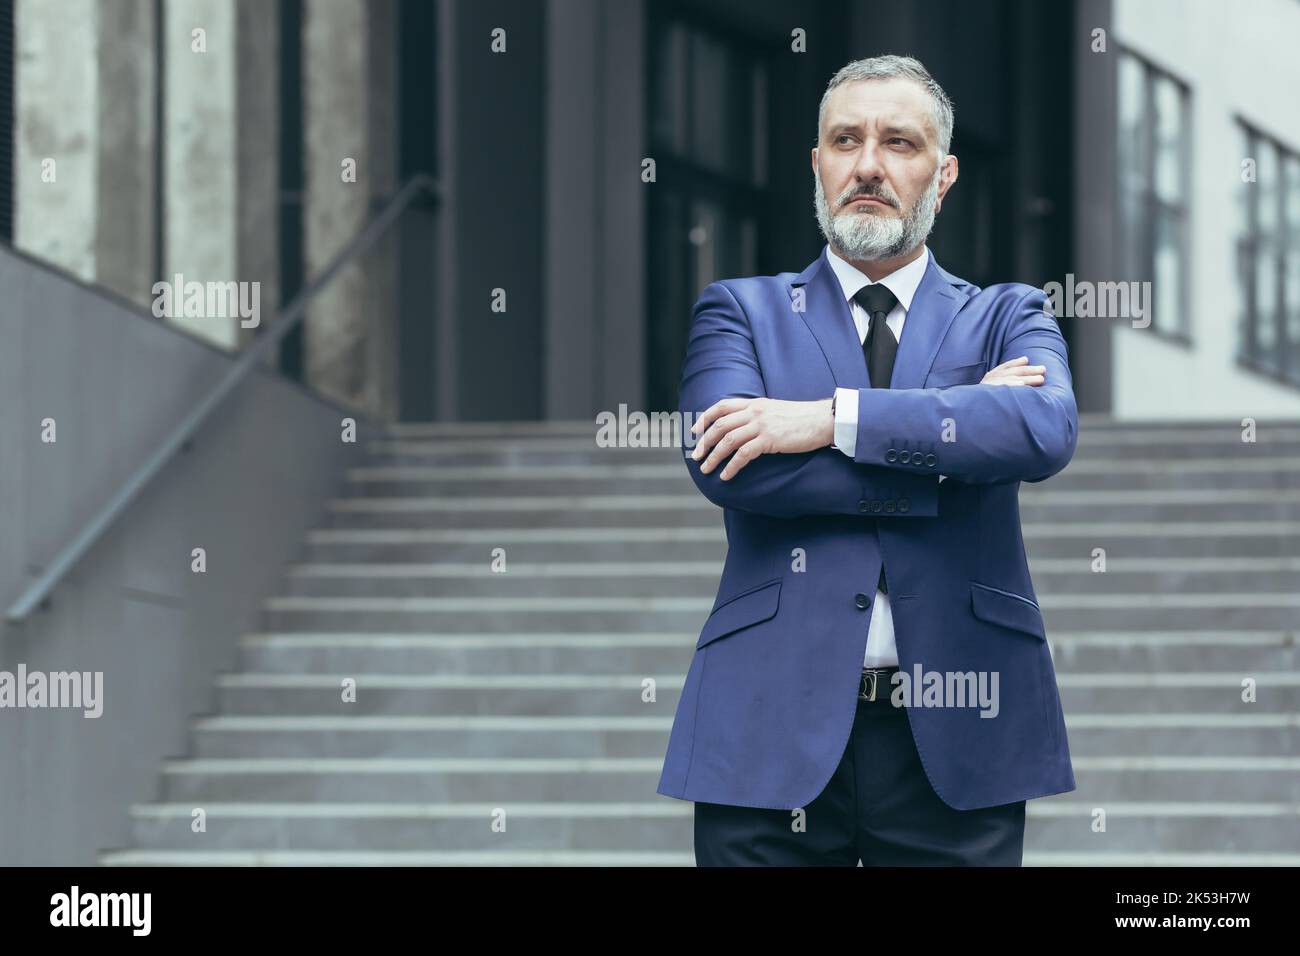 Portrait of a senior gray-haired man director, ceo on the background of the stairs of the office center. He is standing serious in a suit, arms crossed in front, looking to the side. Stock Photo